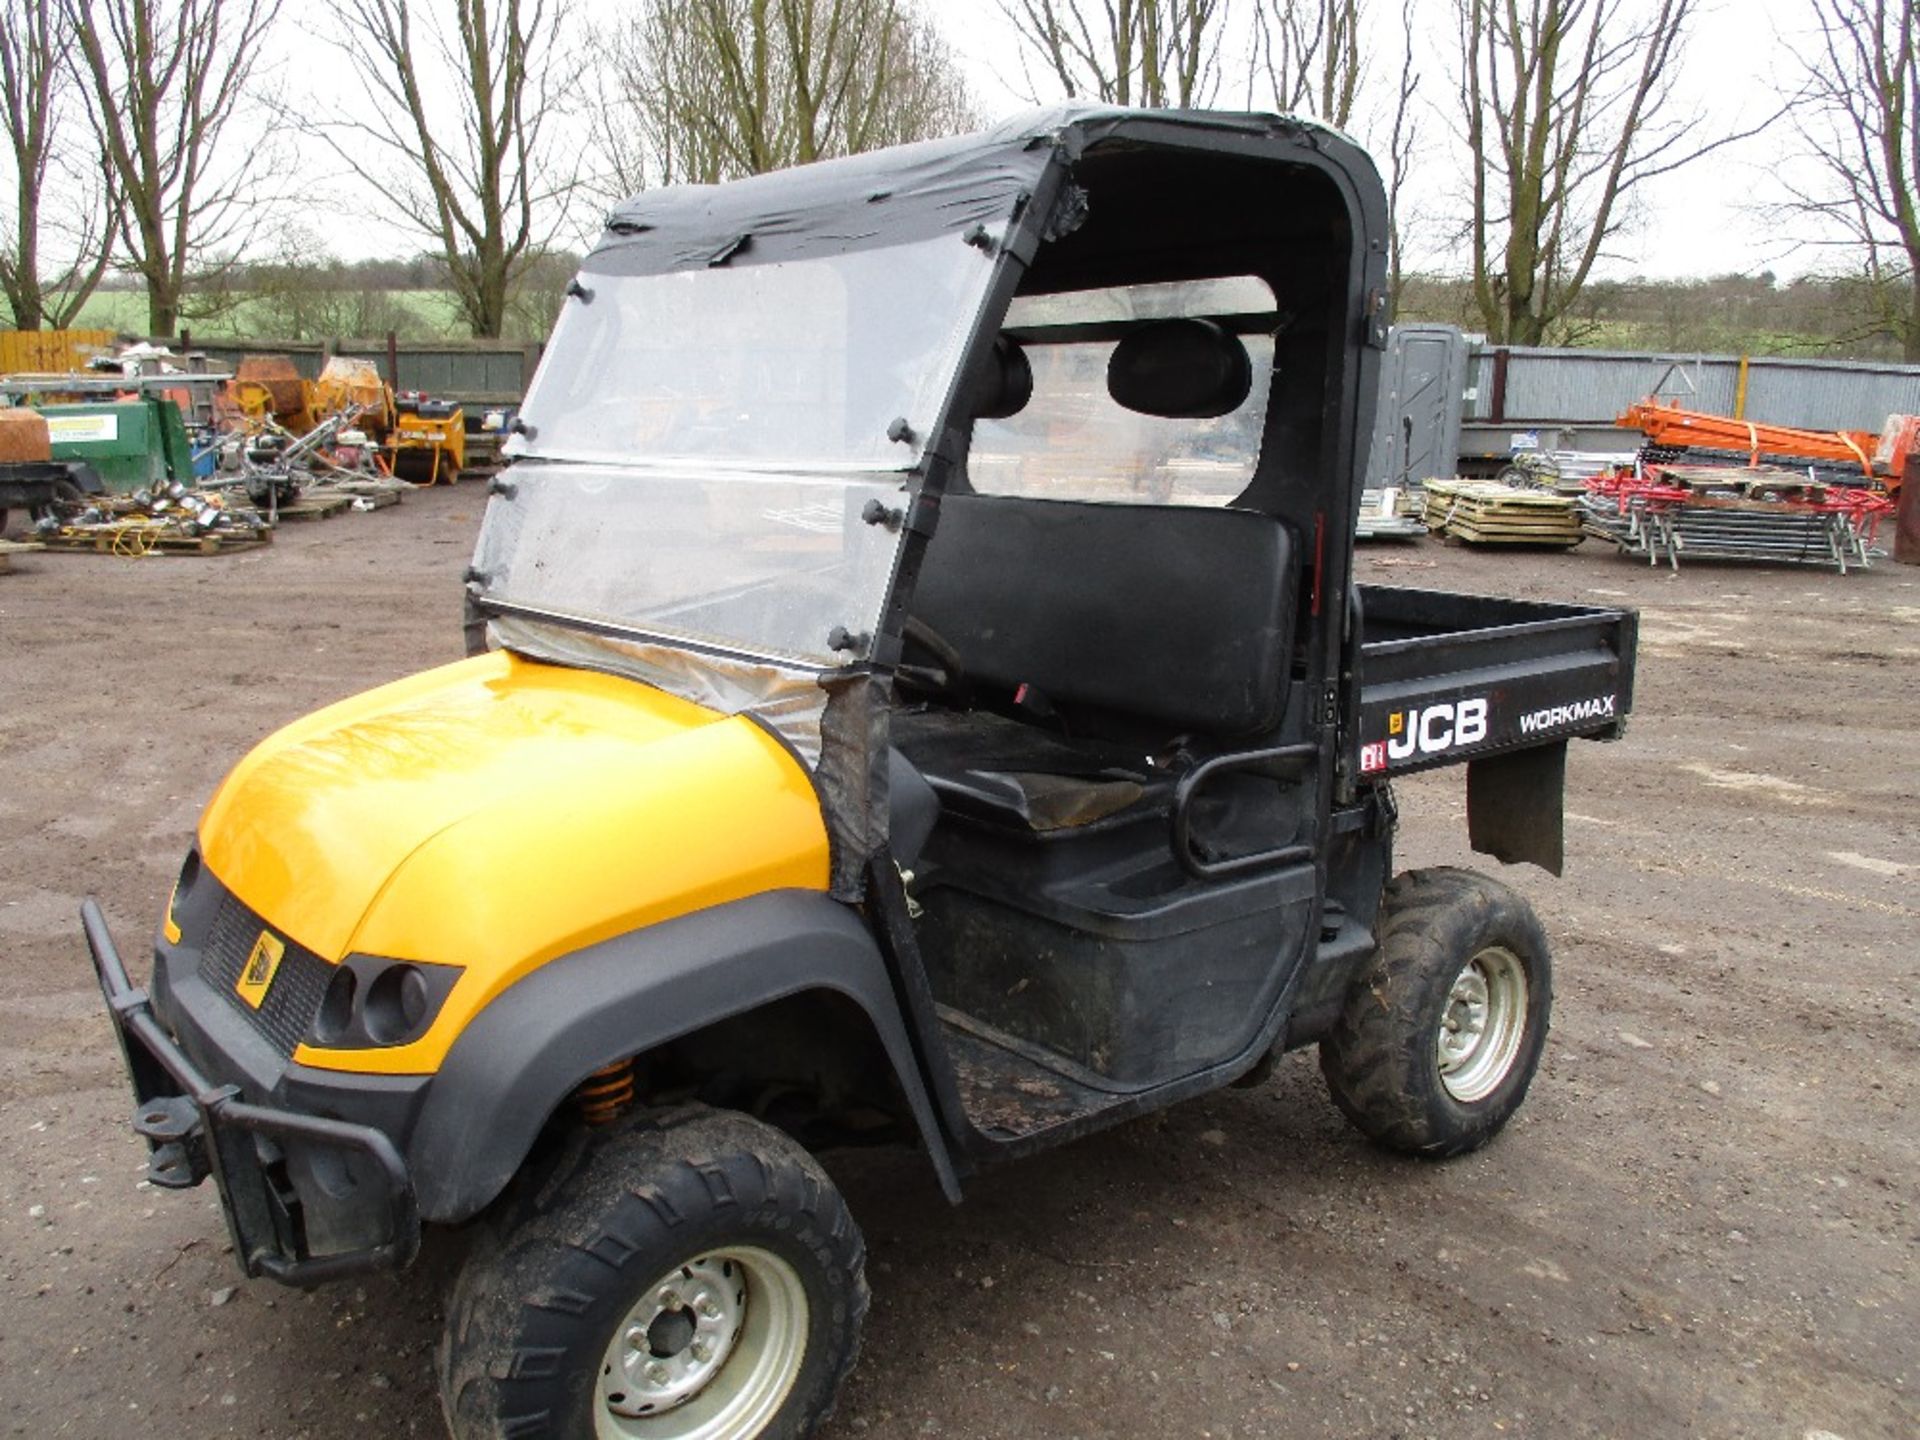 JCB Workmax off road utility vehicle year 2012 build. - Image 3 of 9